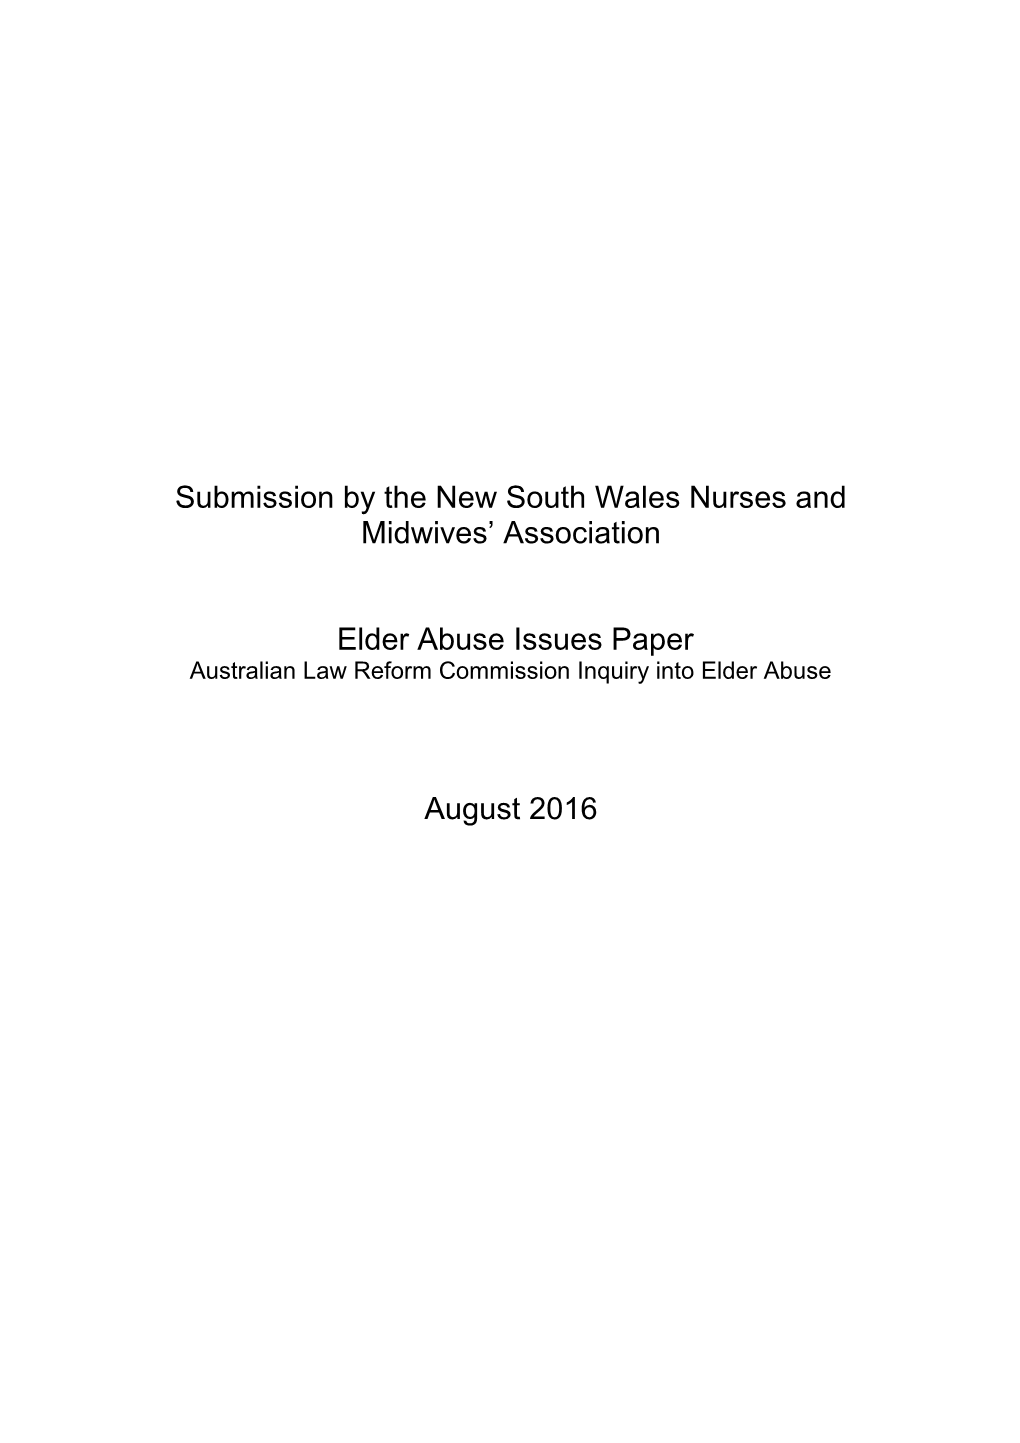 Submission by the New South Wales Nurses and Midwives Association